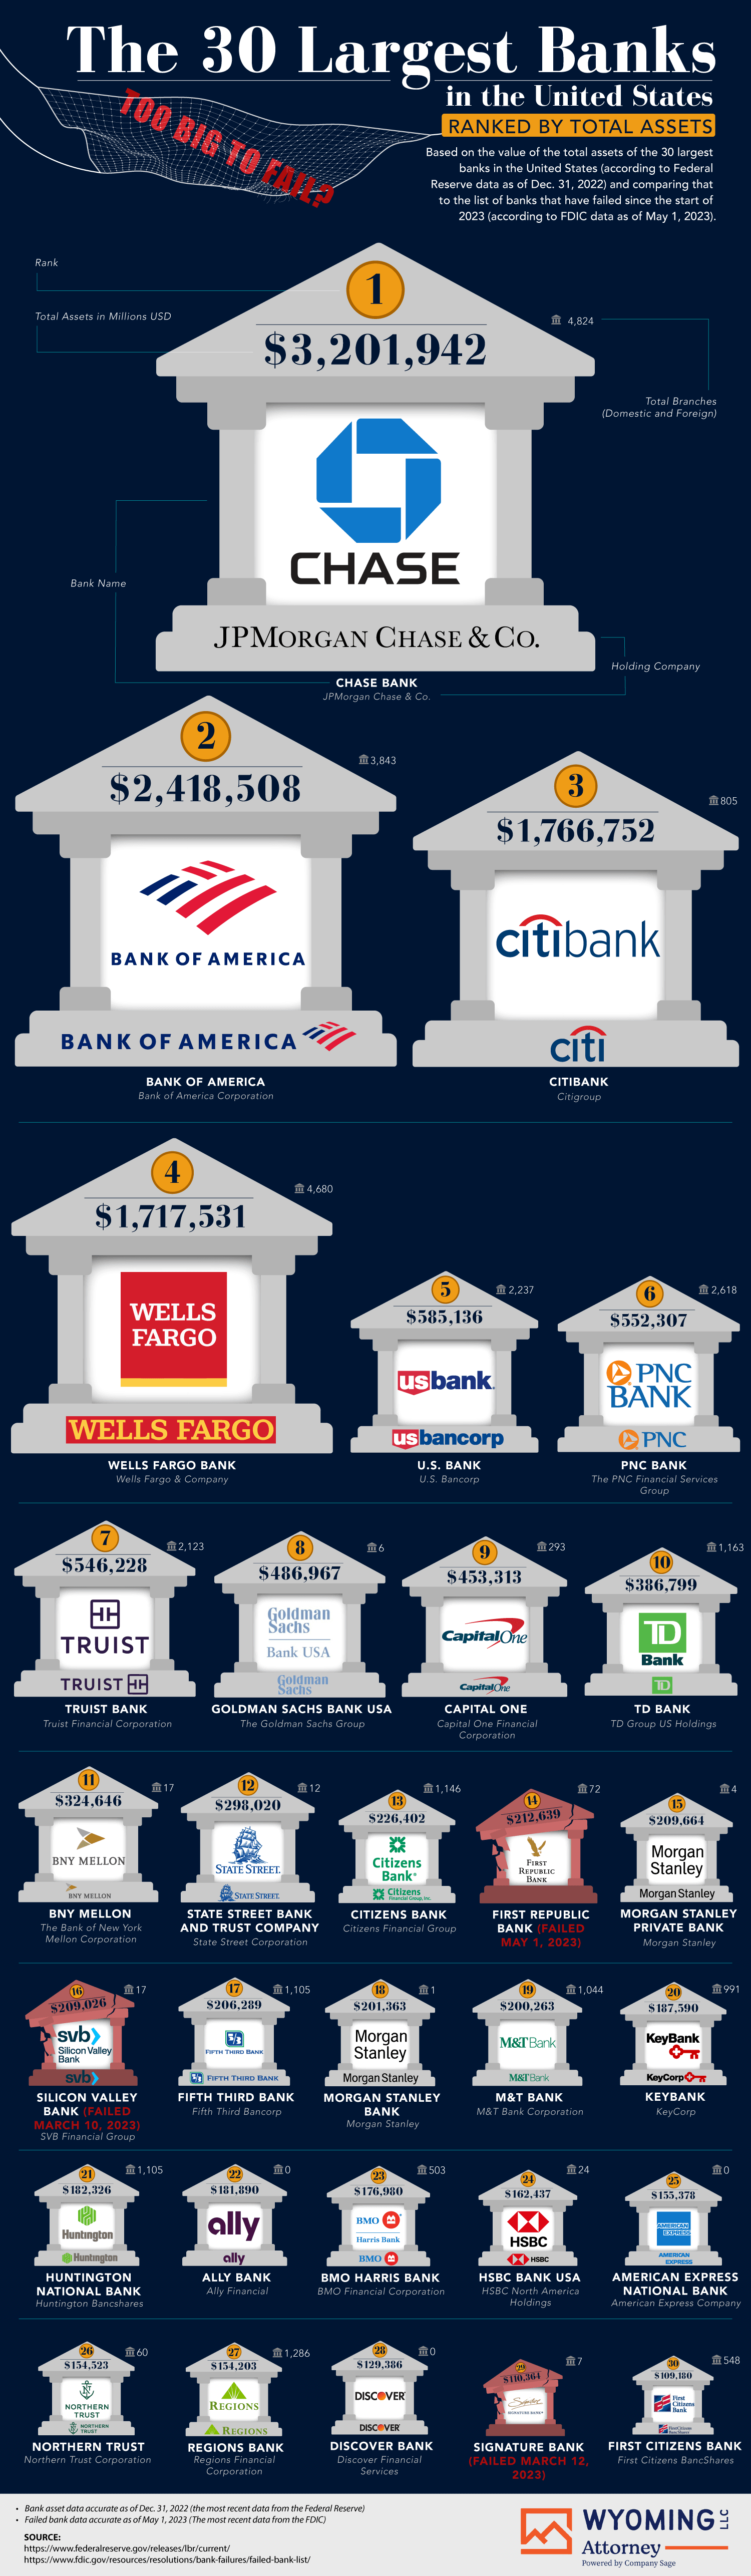 Too Big to Fail? The 30 Largest Banks Ranked by Total Assets - Wyoming LLC Attorney Asset Protection Trust - Infographic